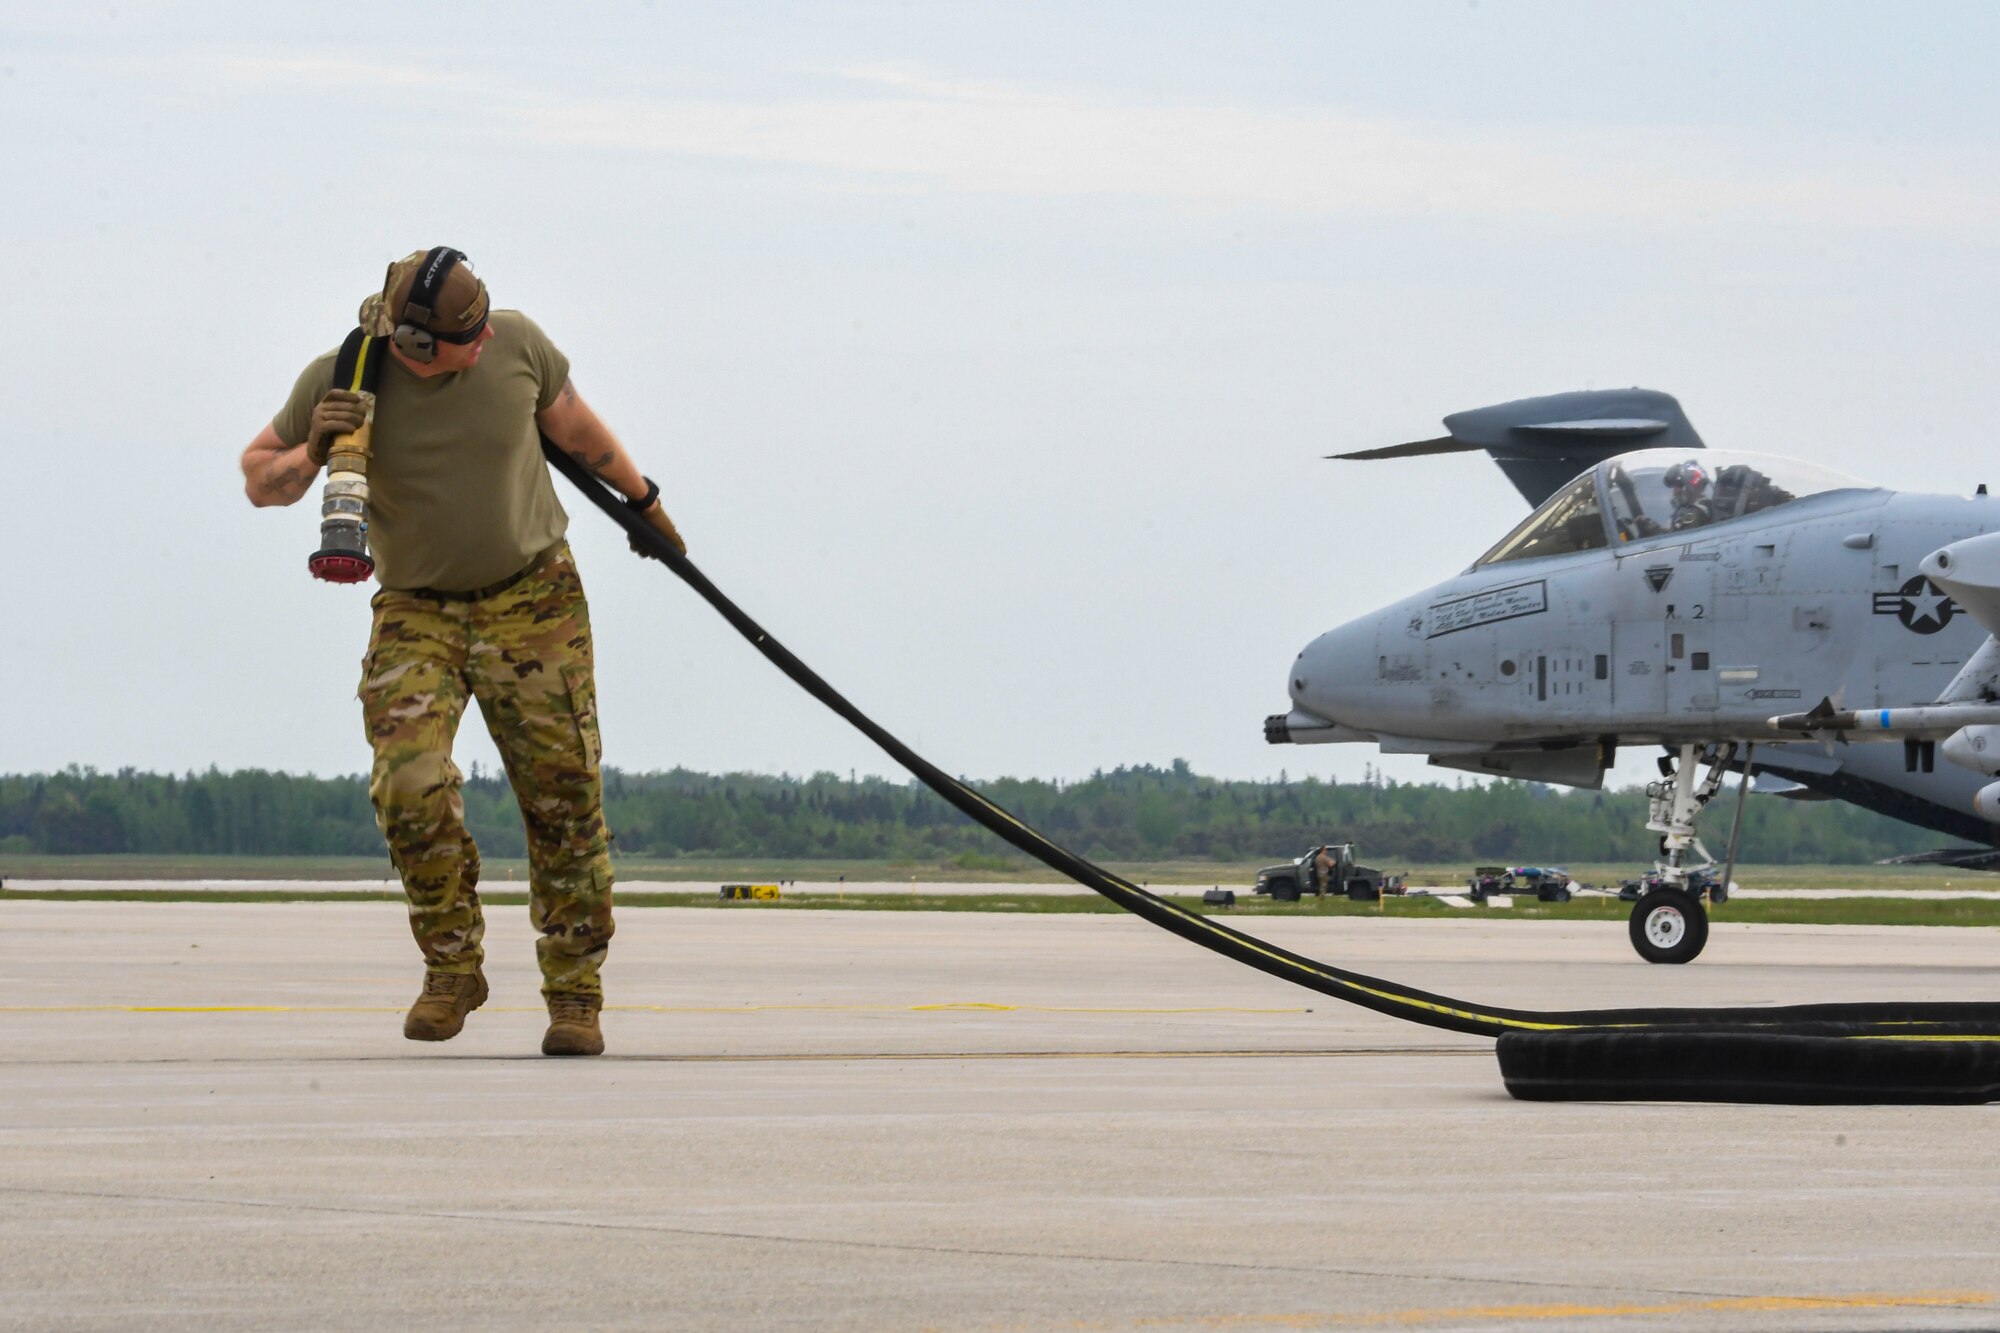 A photo of an airman carrying a fueling nozzle